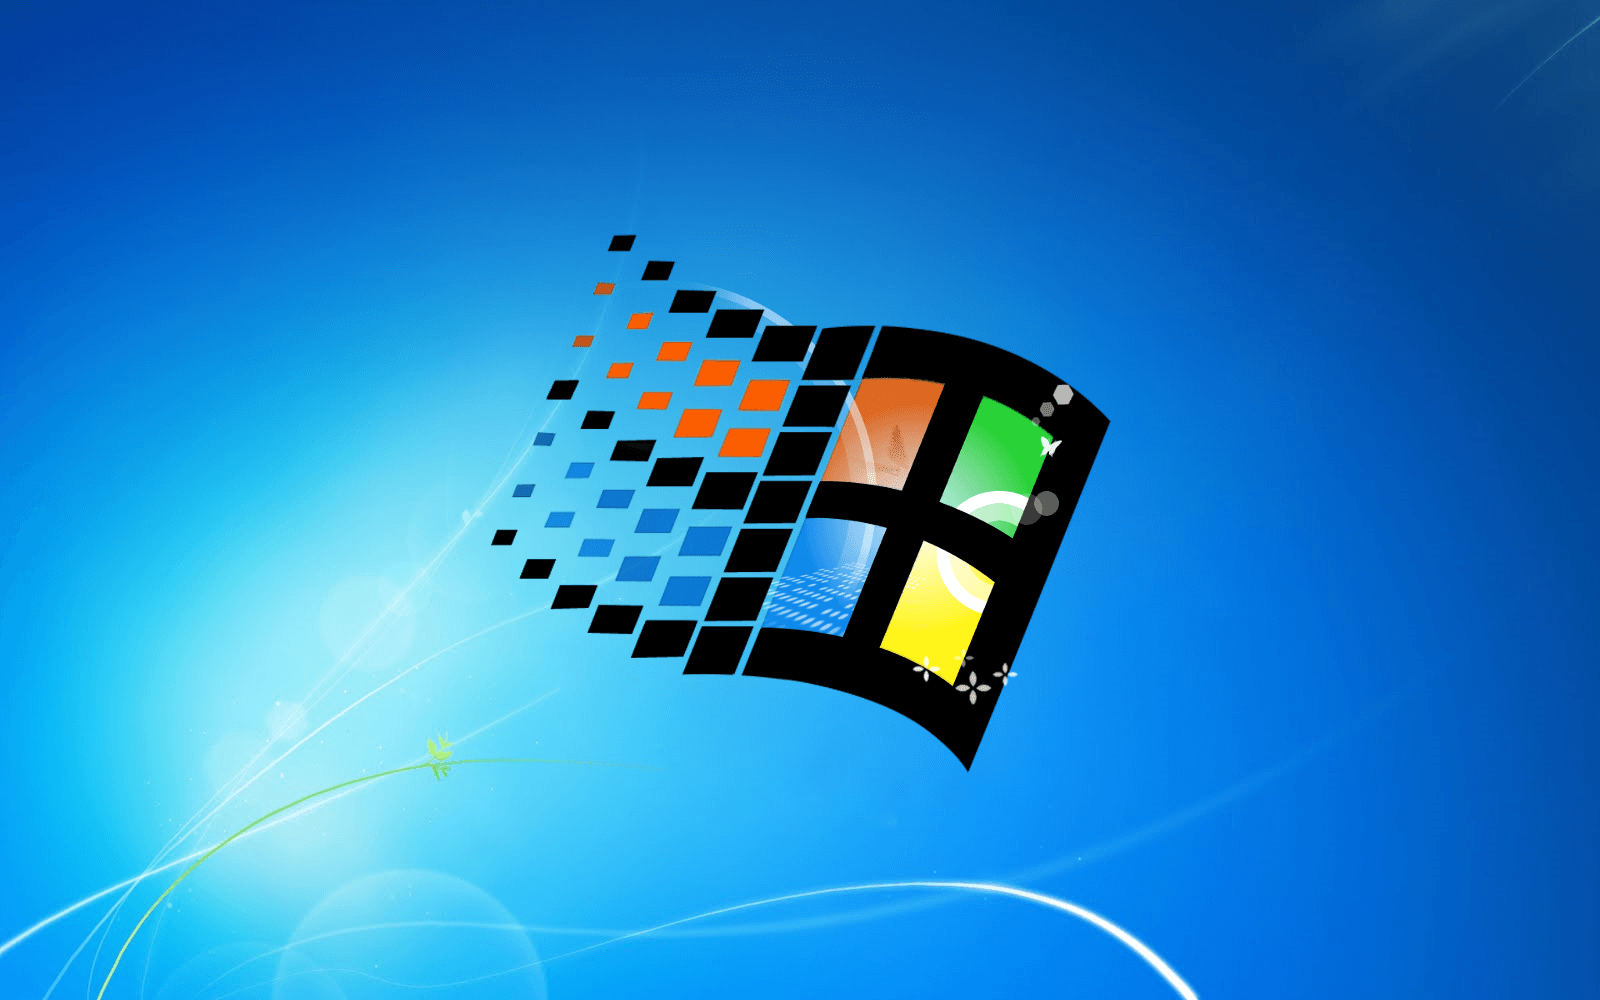 Windows 7 95 flag Wallpaper and Background Imagex1000